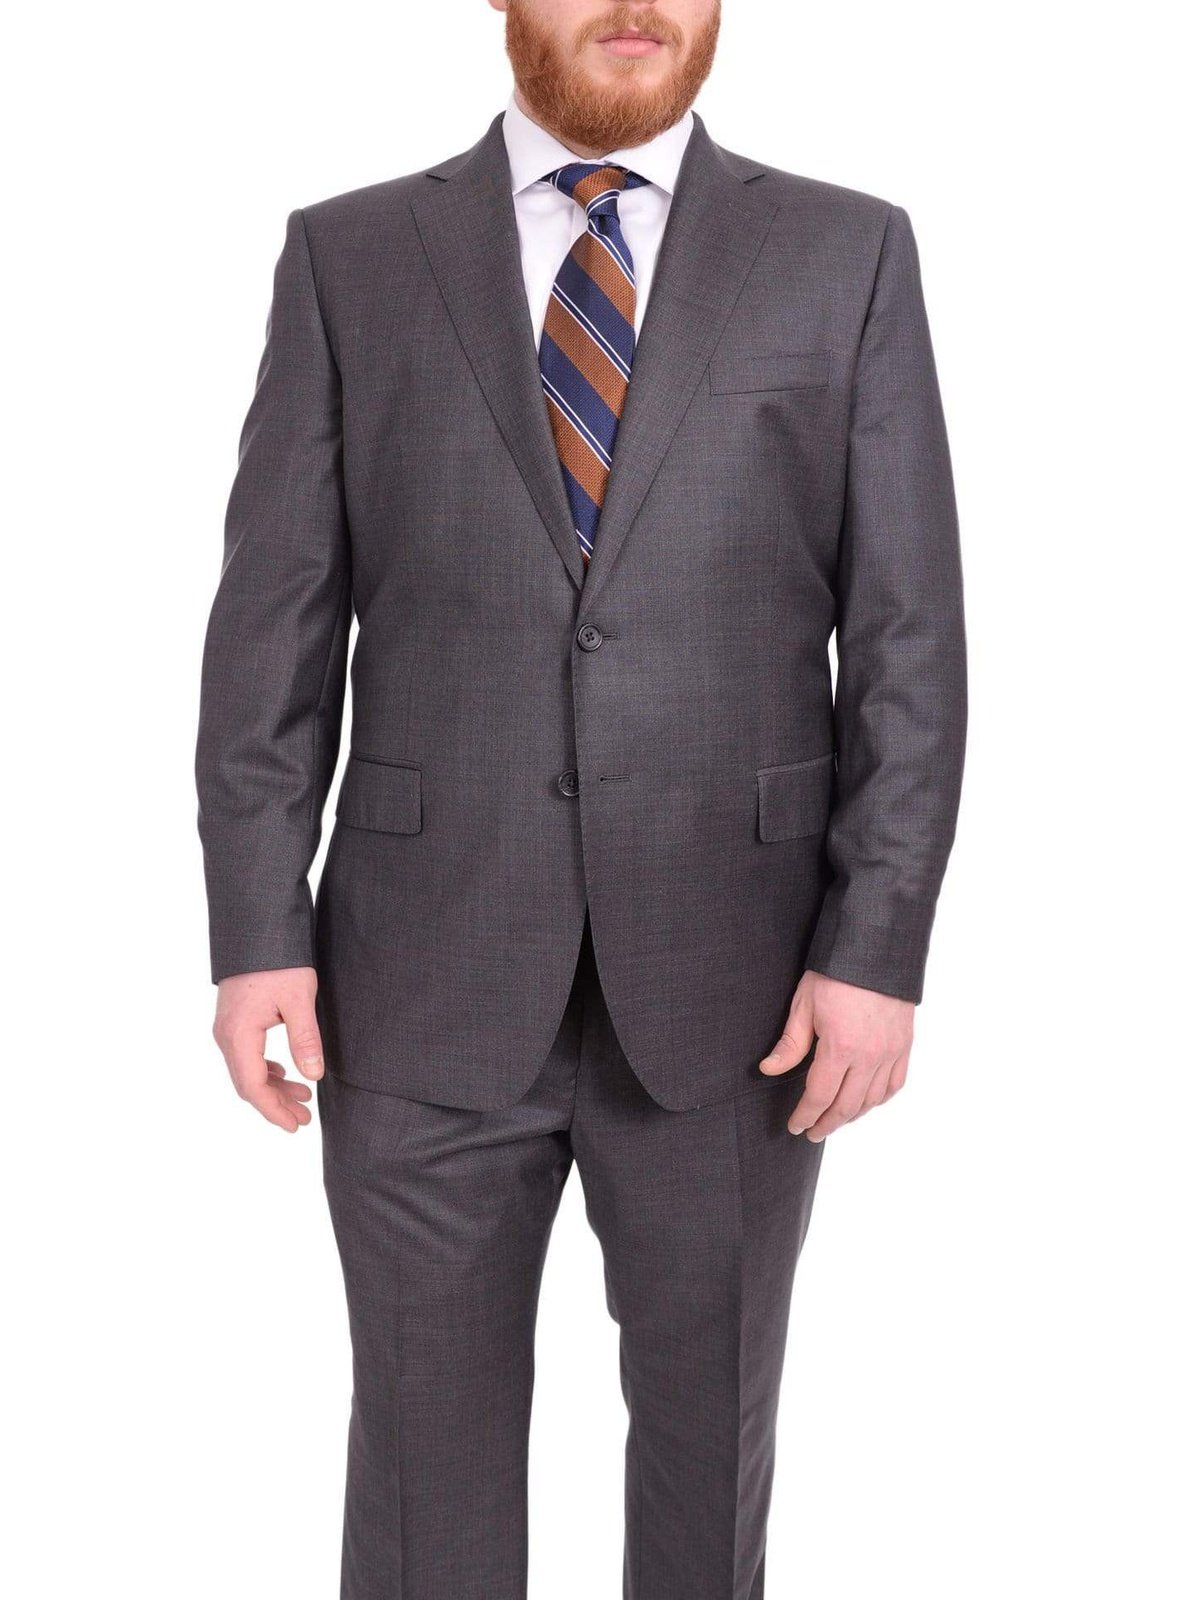 Blujacket TWO PIECE SUITS Blujacket Classic Fit Gray Heather Half Canvassed Reda Italian Wool Suit